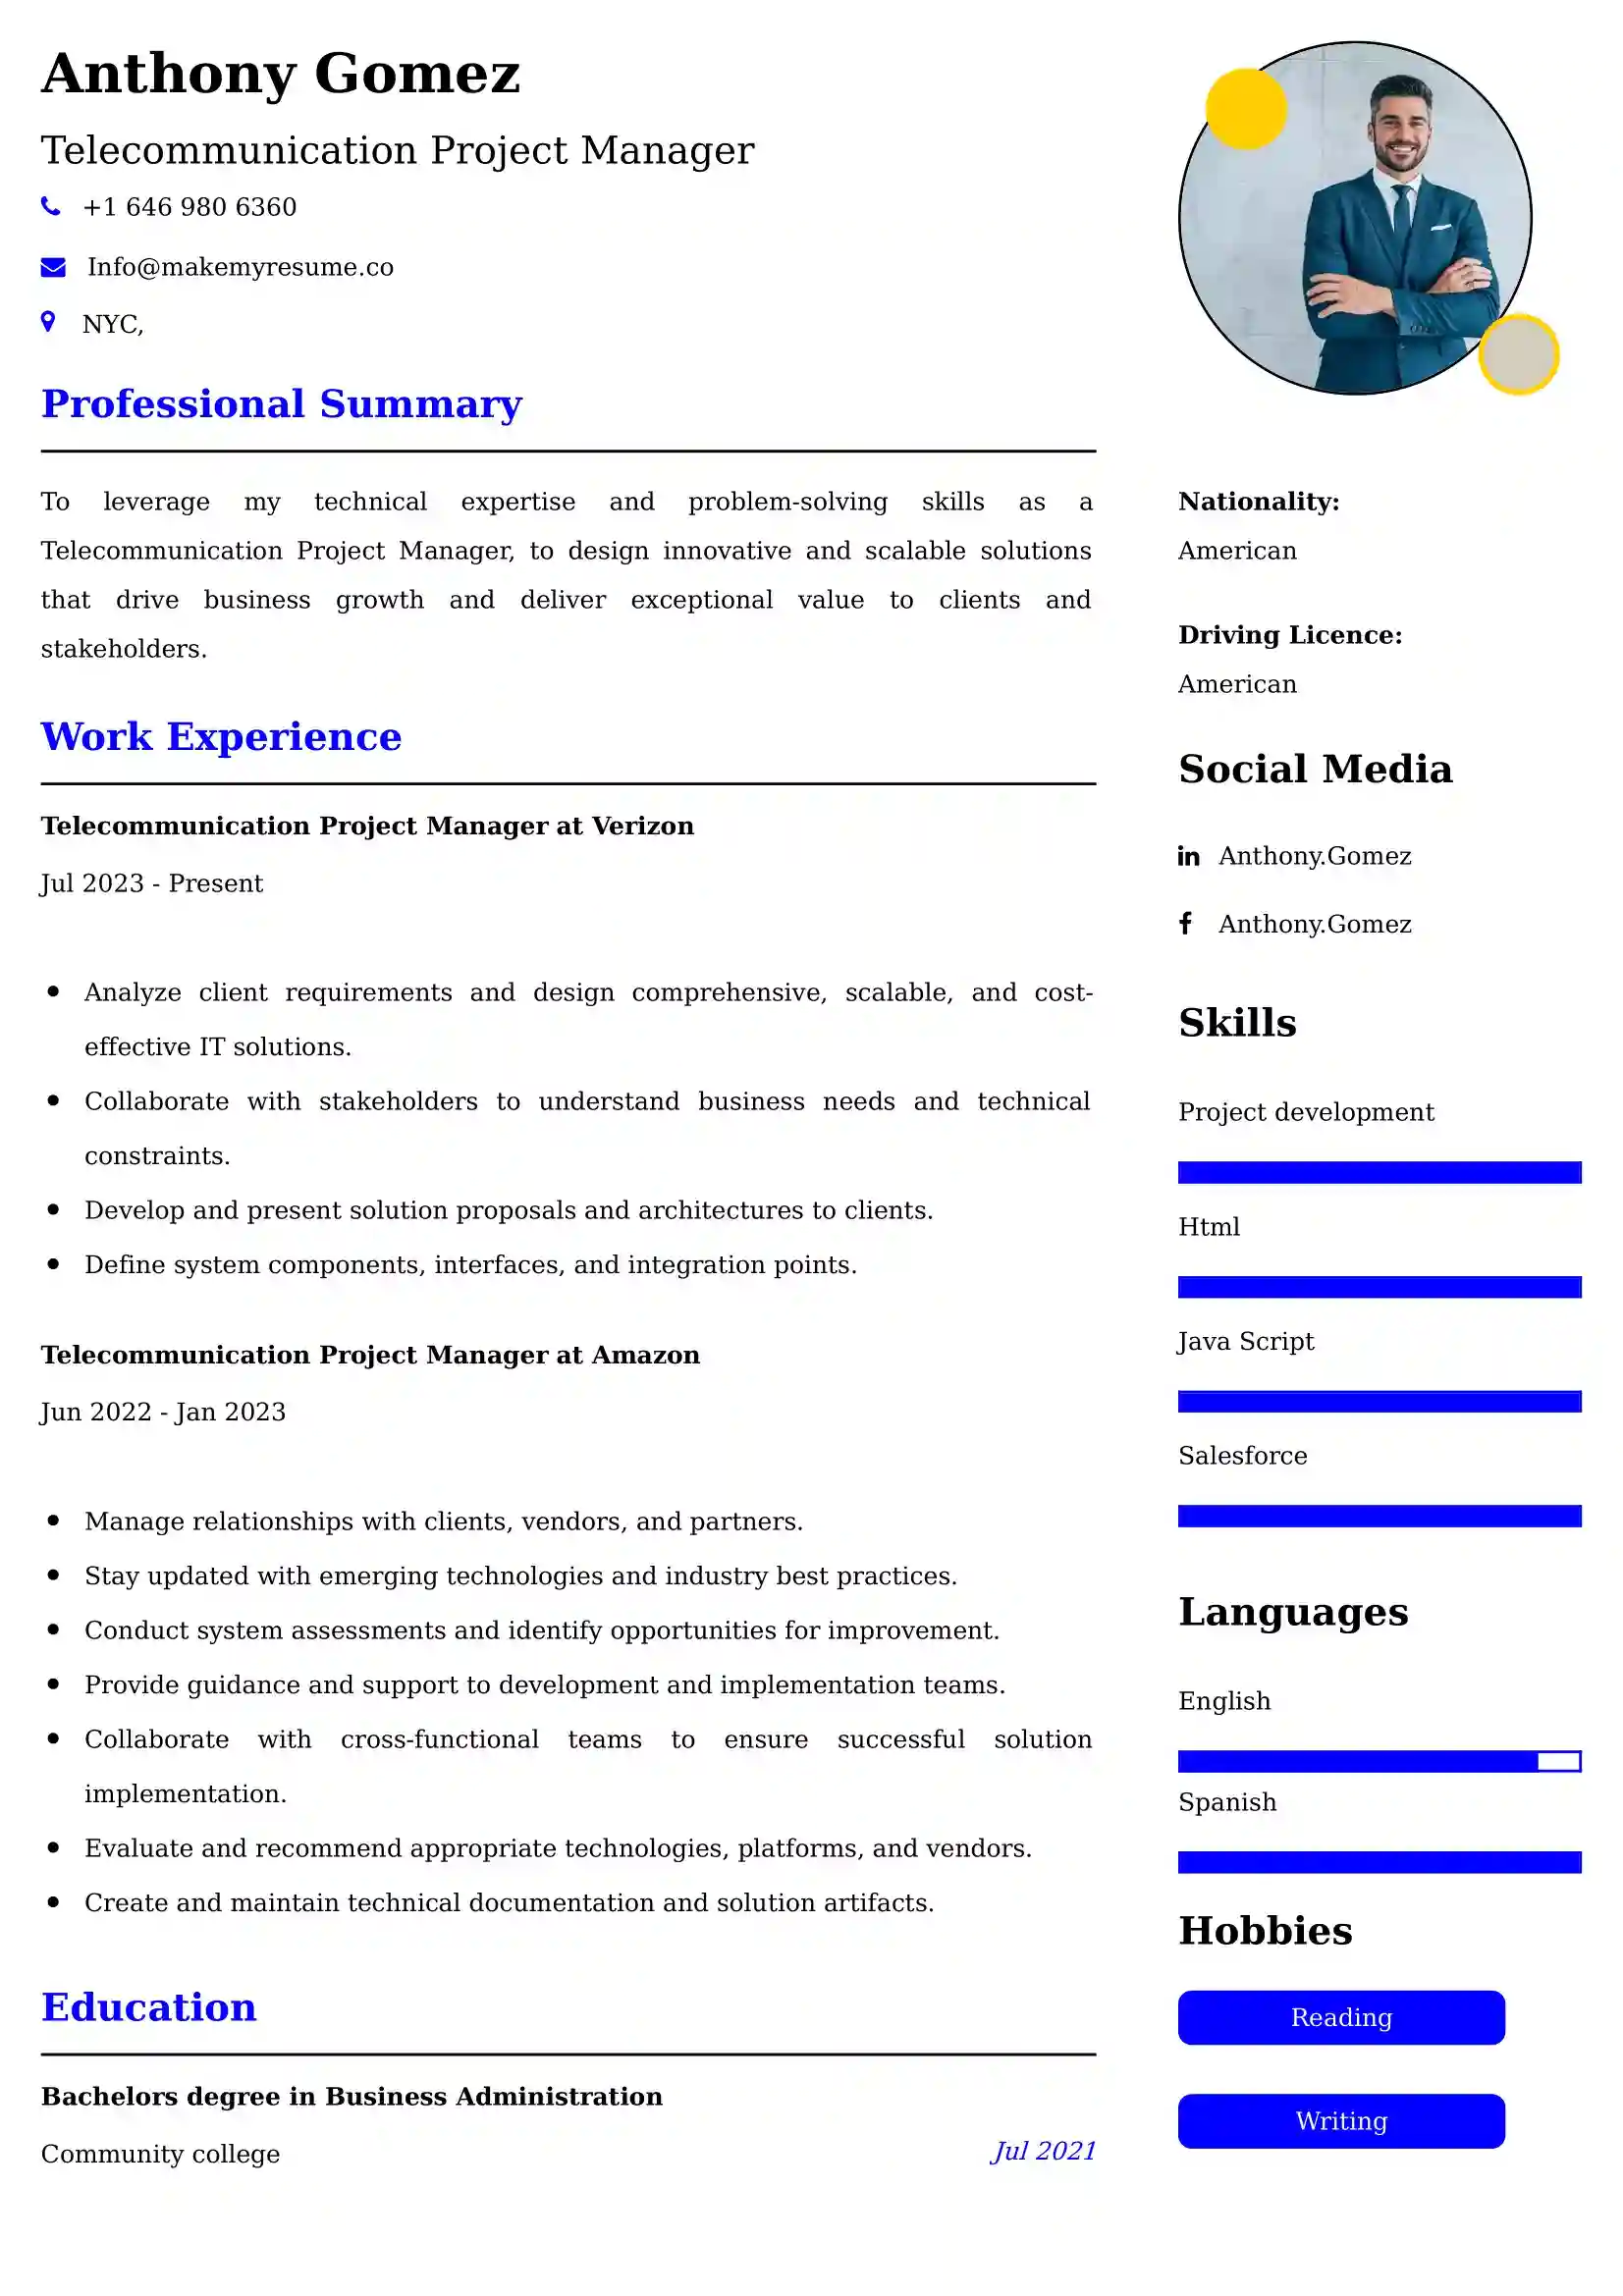 Telecommunication Project Manager Resume Examples for UK Jobs - Tips and Guide